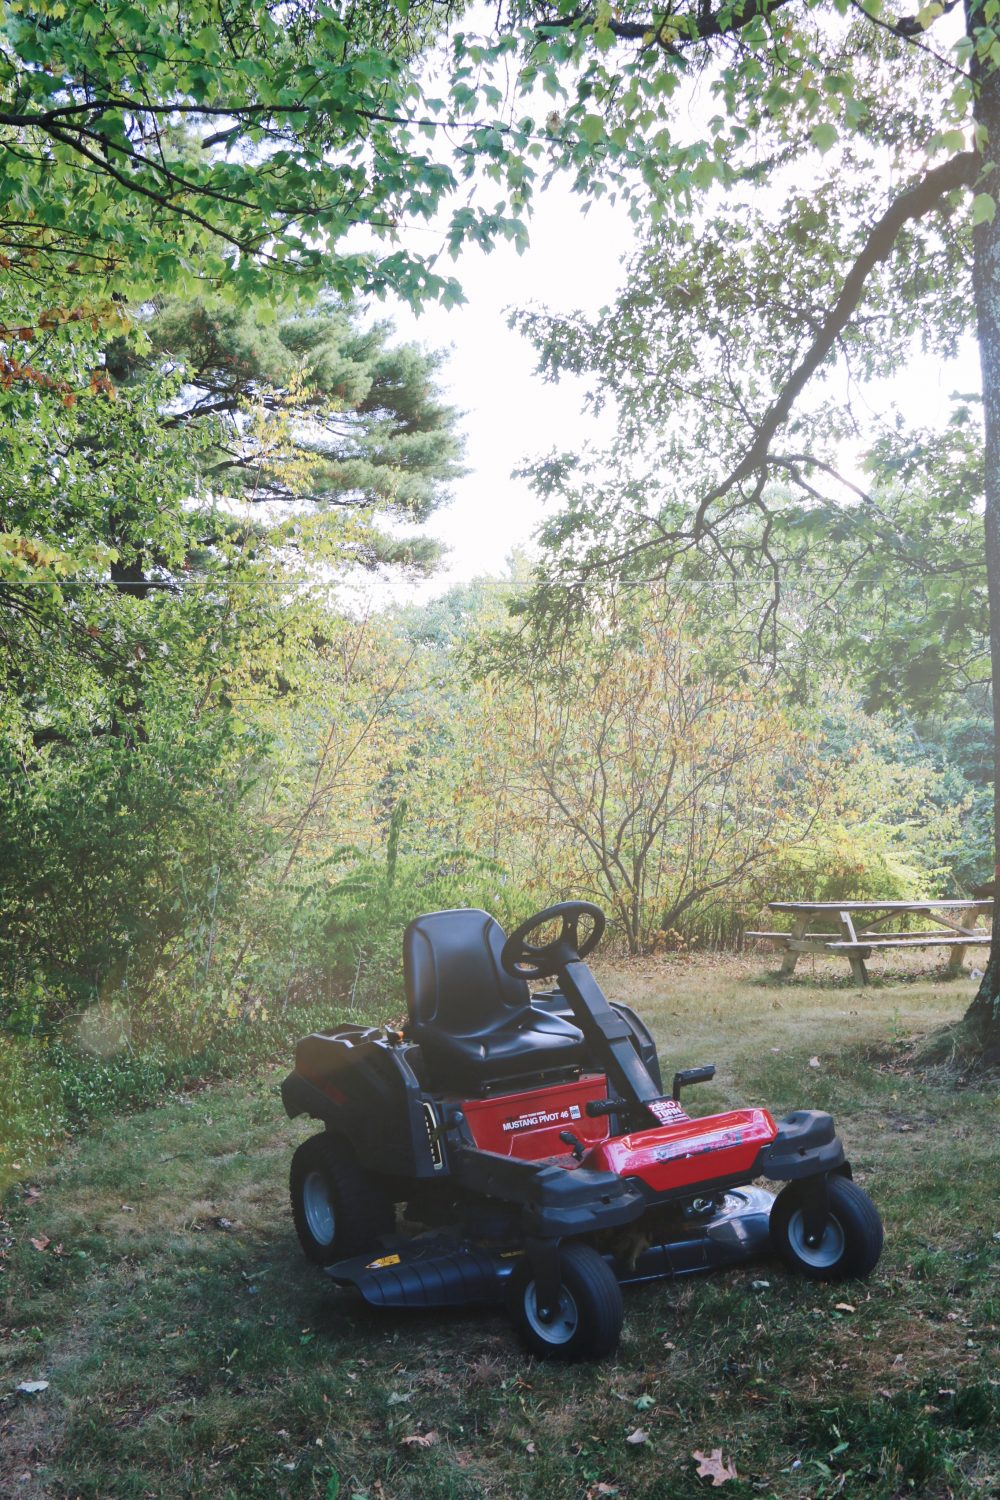 A Zero Turn Riding Mower parked in a wooded area.